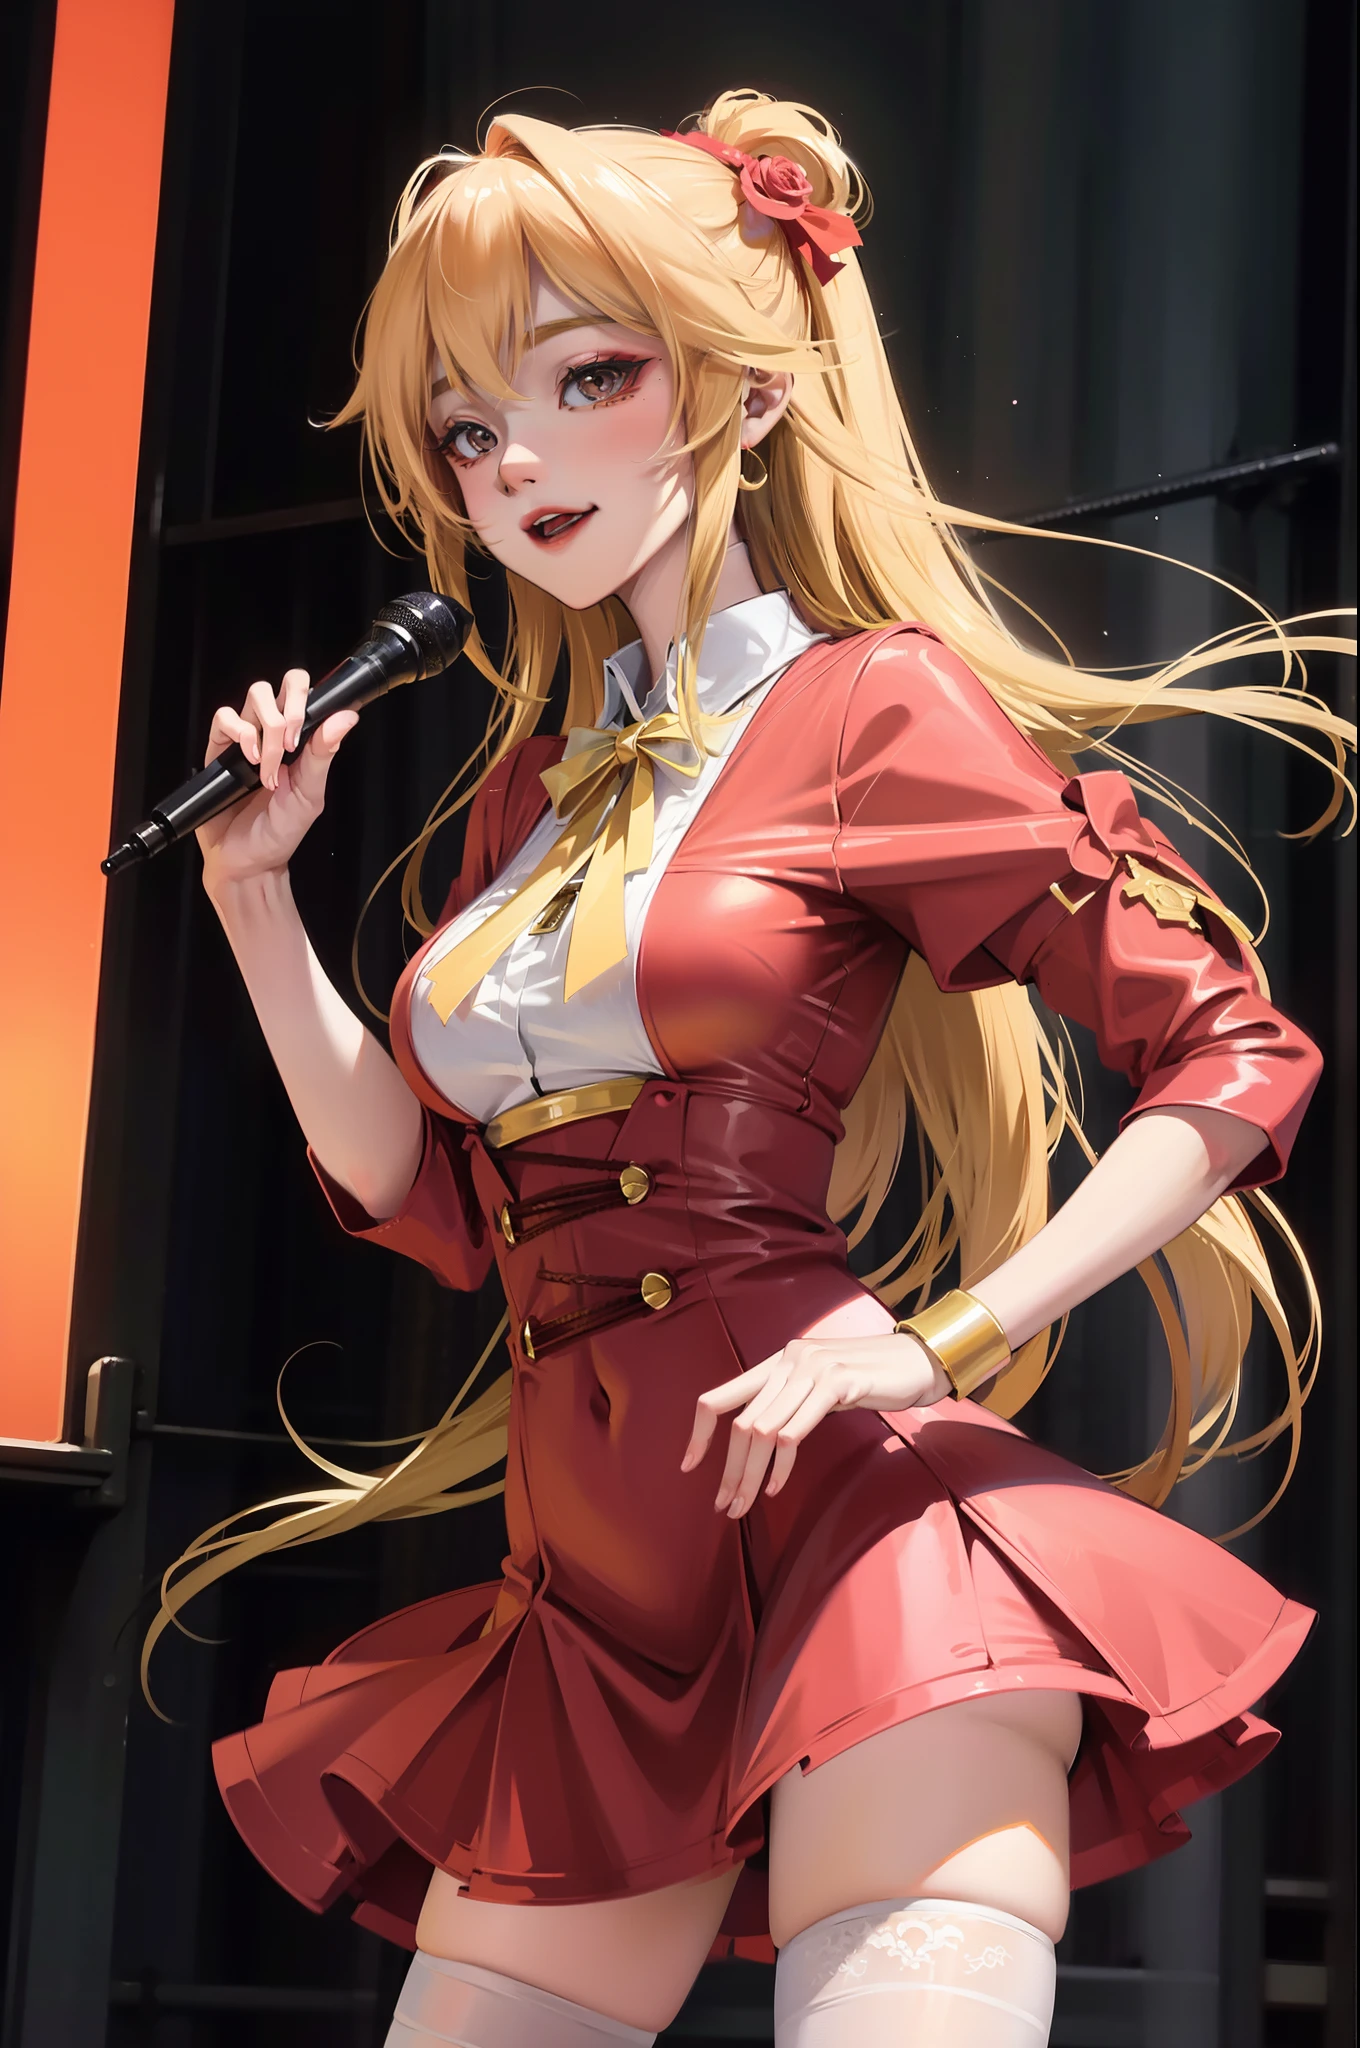 arms back behind，Anime girl in red dress singing into microphone in front of the audience, Extremely detailed Artgerm, Kushatt Krenz Key Art Women, Artistic germ style, Style Artgerm, art-style, IG model | Art germ, Art germ on ArtStation Pixiv, Art germ. High detail, Art germ. anime illustration